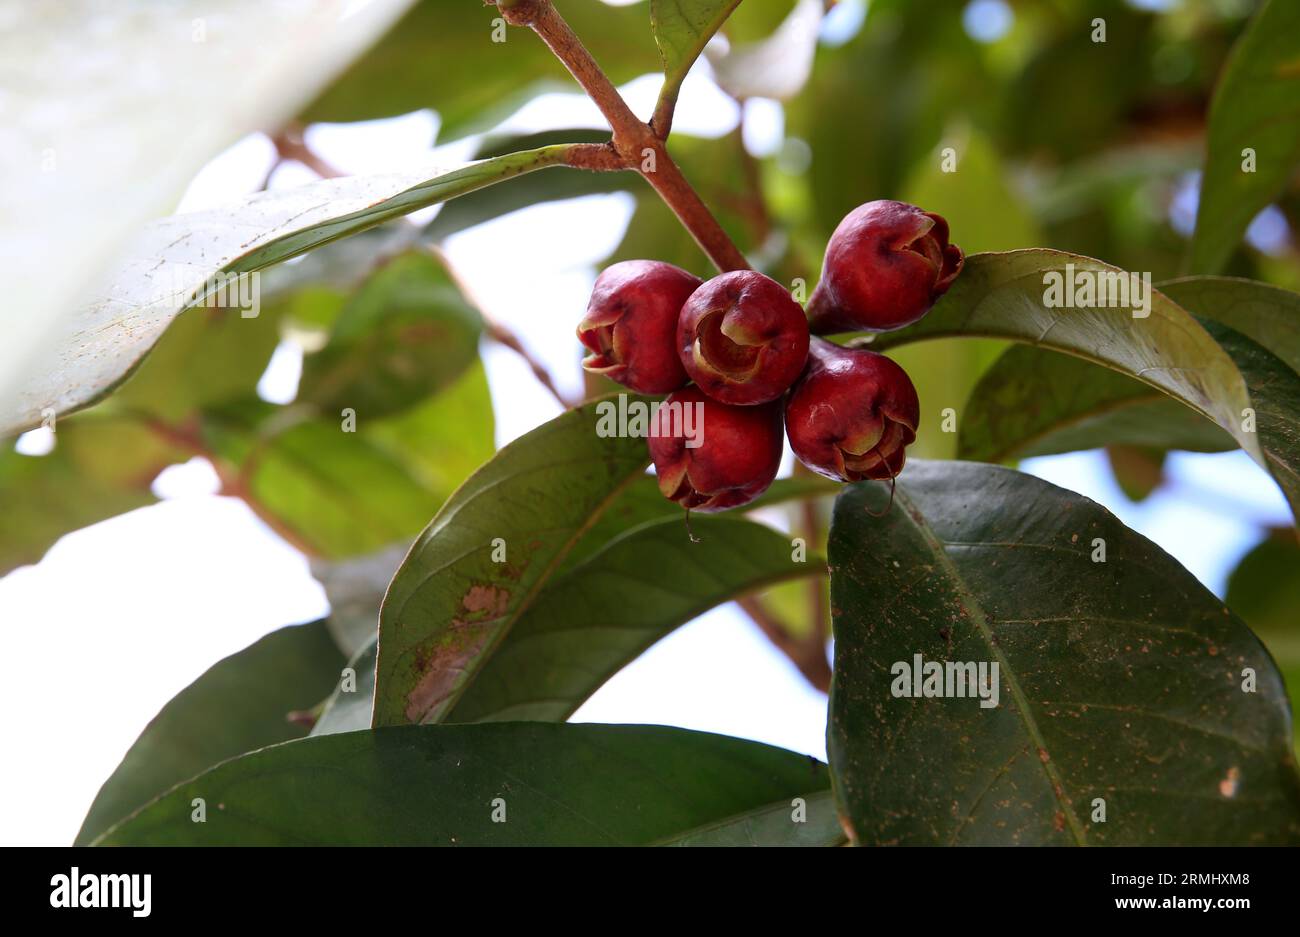 salvador, bahia, brazil - august 24, 2023: red jambo fruit - syzygium malaccense - in an orchard in the city of Salvador. Stock Photo